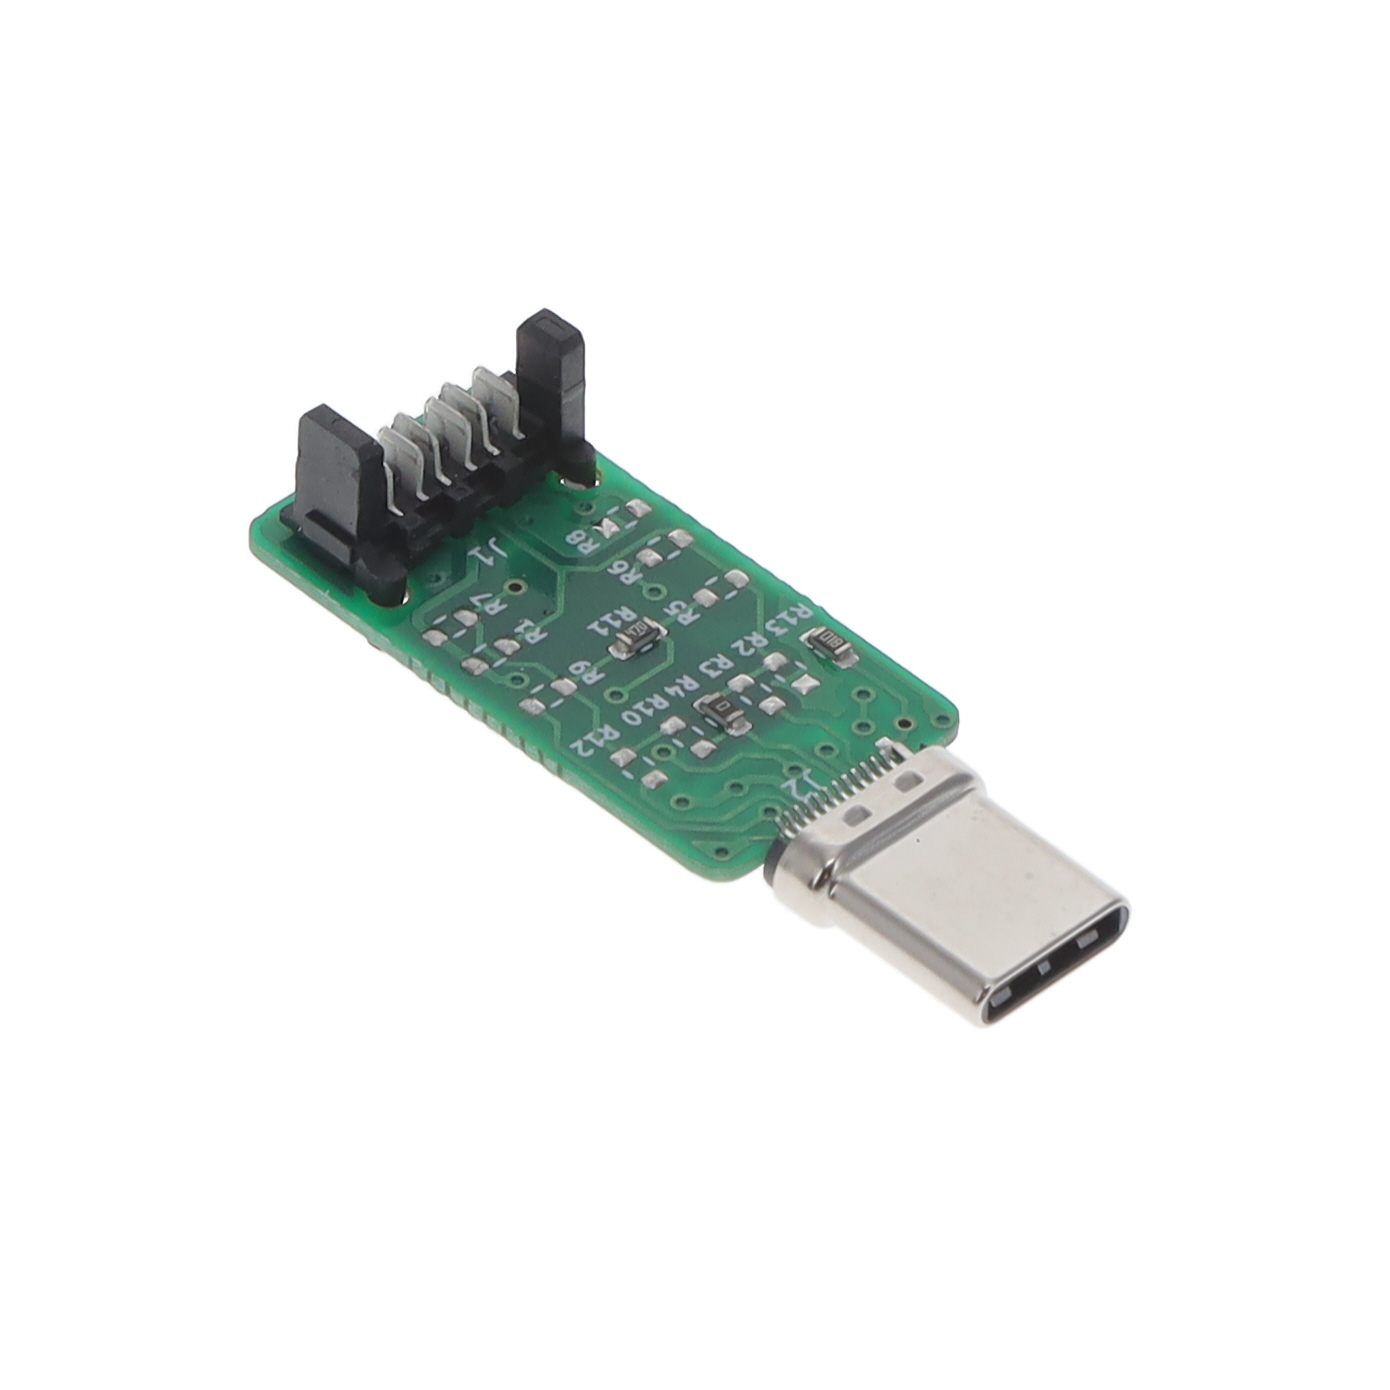 【EVLONEPCC】USB TYPE-C ADAPTER TO CONNECT ST